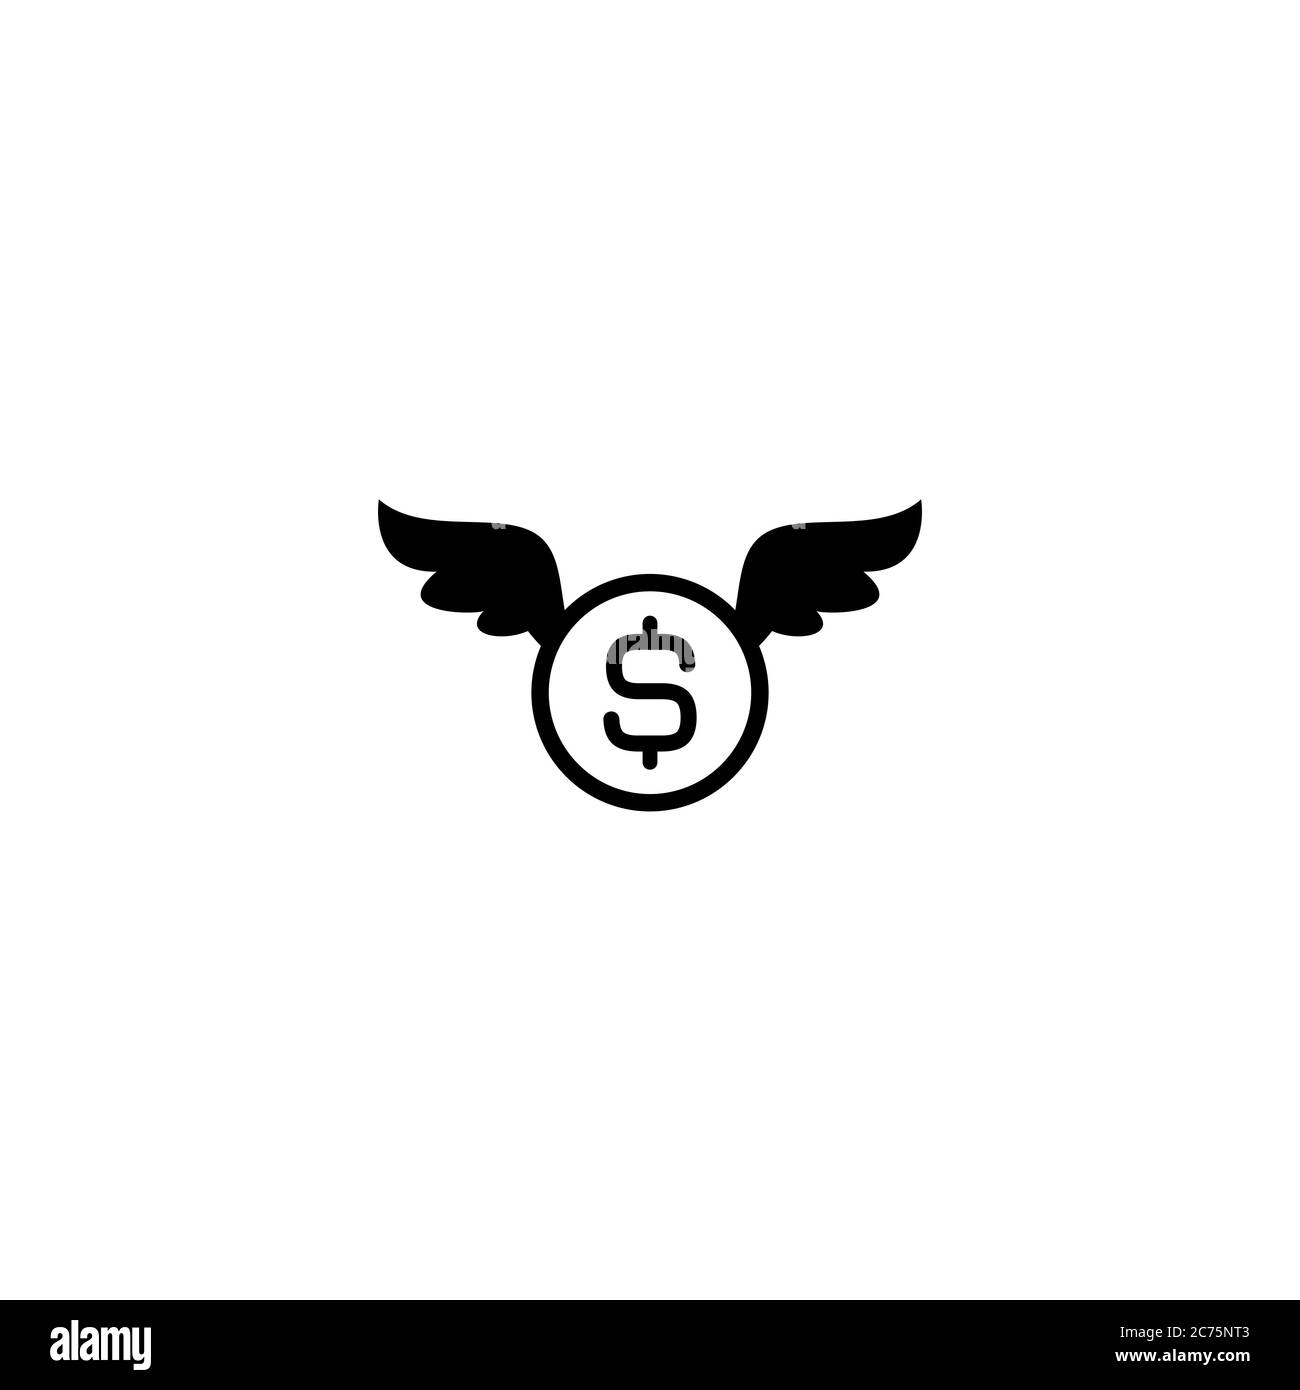 dollar coin with wings. Black flat icon isolated on white background. Flying money. Economy, finance, money pictogram. Wealth symbol. Vector illustrat Stock Vector